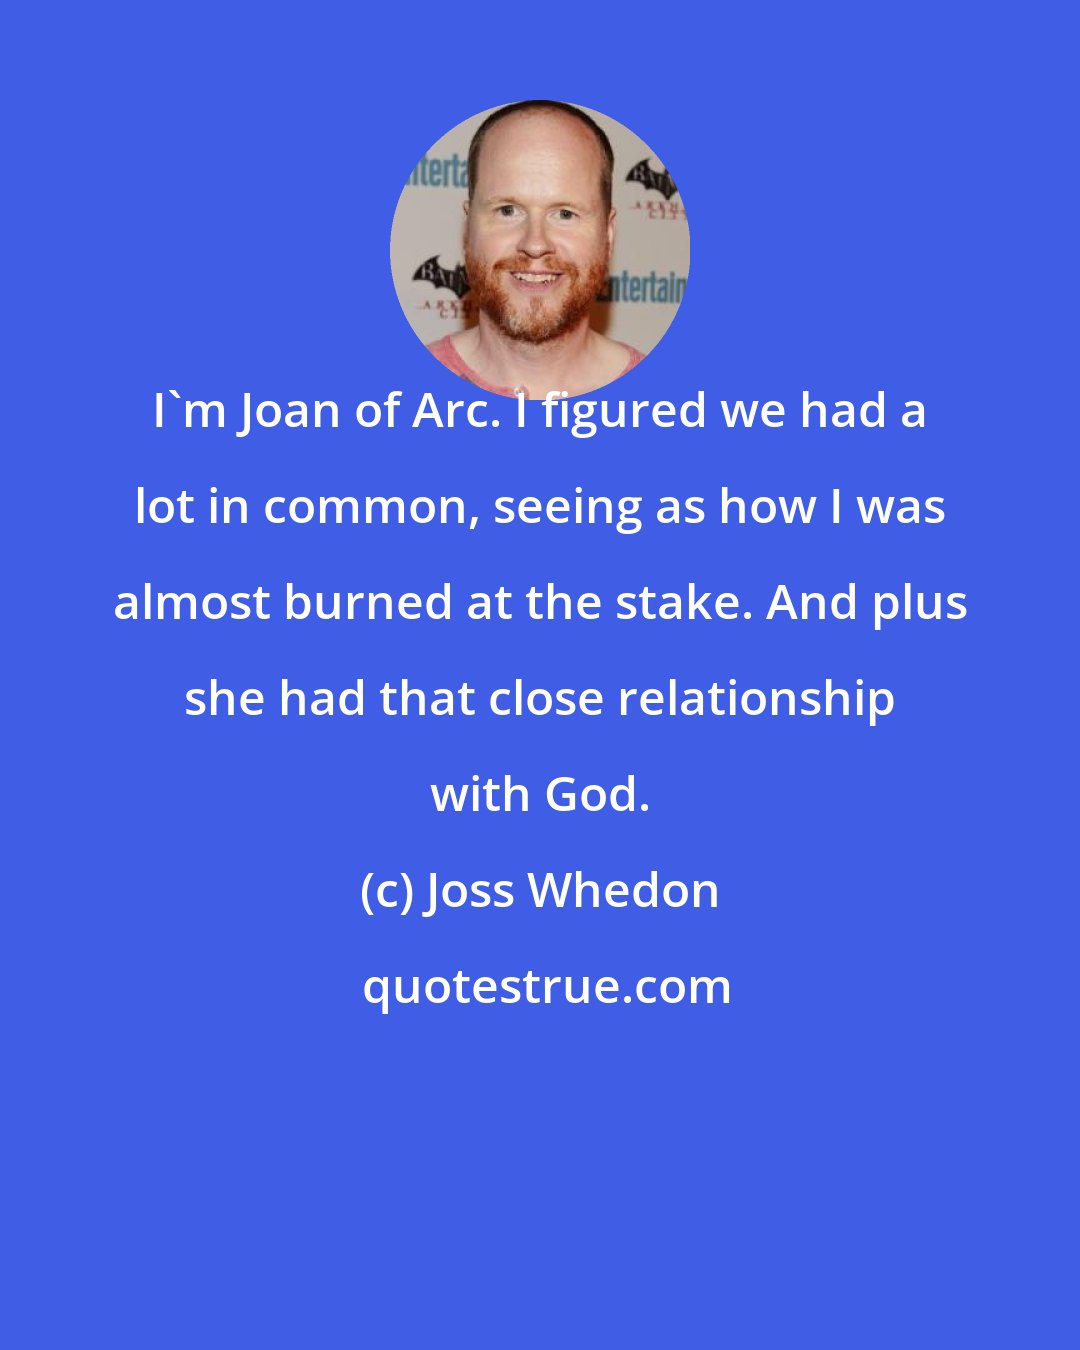 Joss Whedon: I'm Joan of Arc. I figured we had a lot in common, seeing as how I was almost burned at the stake. And plus she had that close relationship with God.